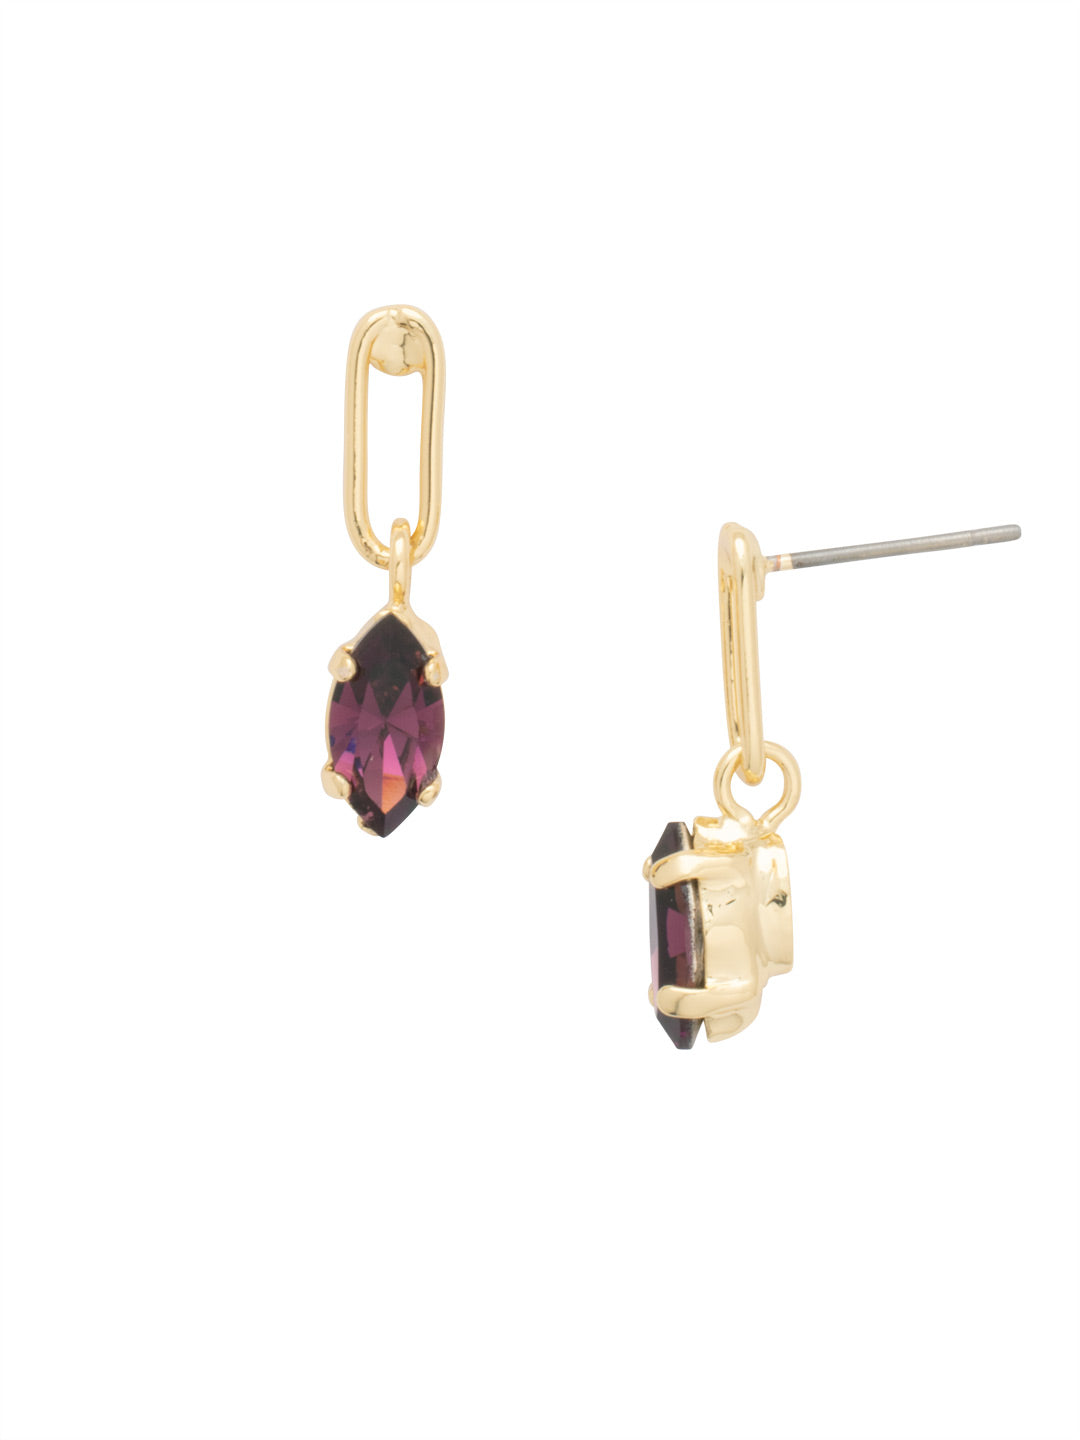 Clarissa Chain Link Dangle Earrings - EFL66BGMRL - <p>The Clarissa Chain Link Dangle Earrings feature a navette cut crystal dangling from a single chain link on a post. From Sorrelli's Merlot collection in our Bright Gold-tone finish.</p>